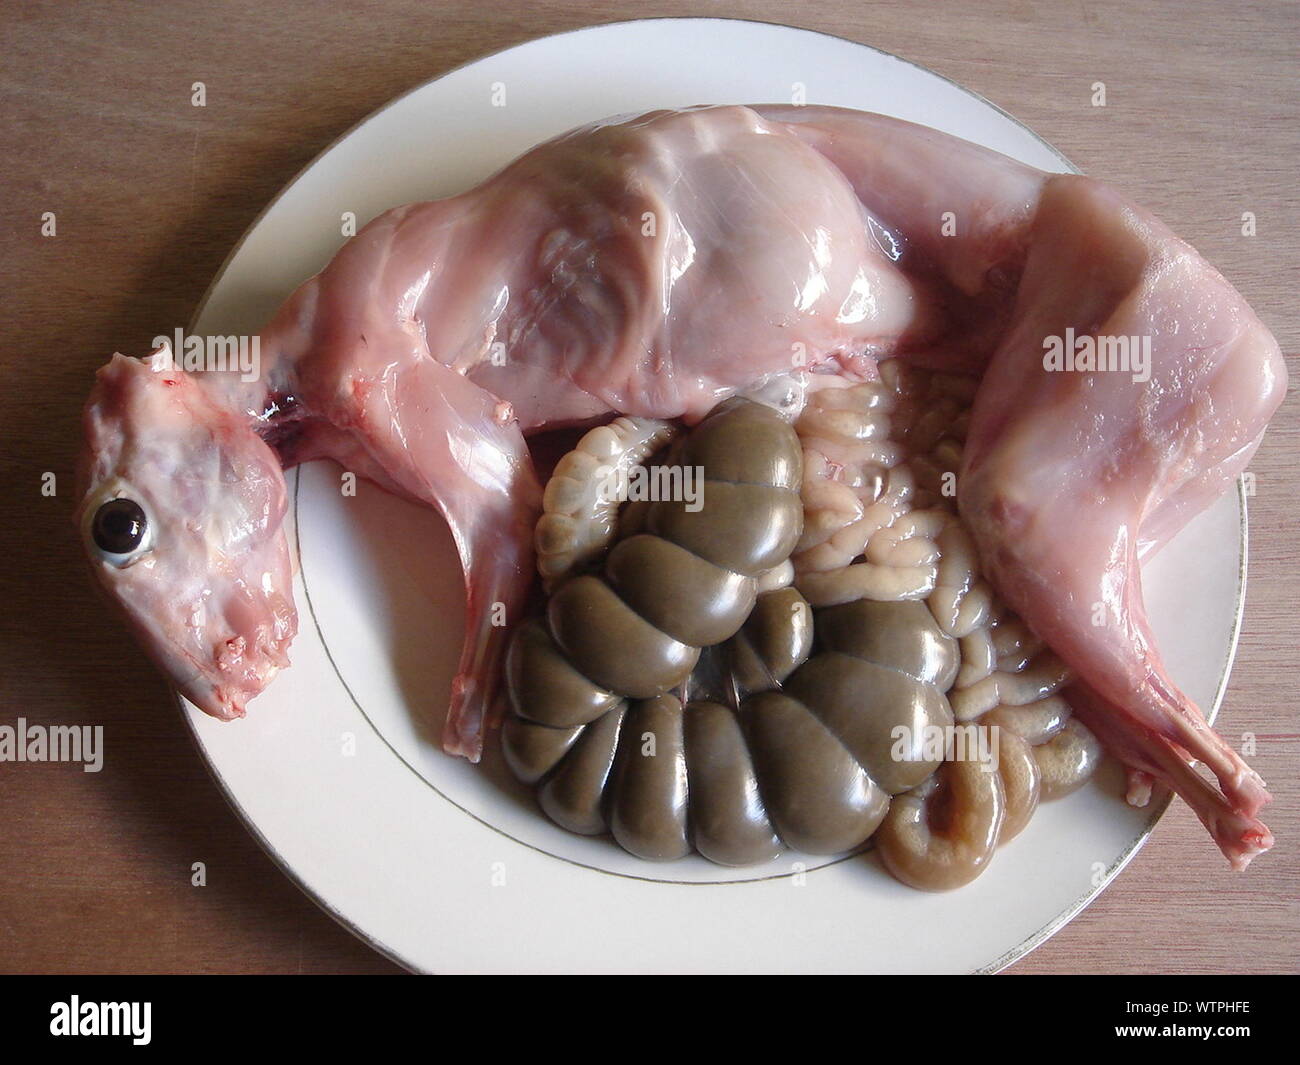 Skinned Rabbit High Resolution Stock Photography and Images - Alamy